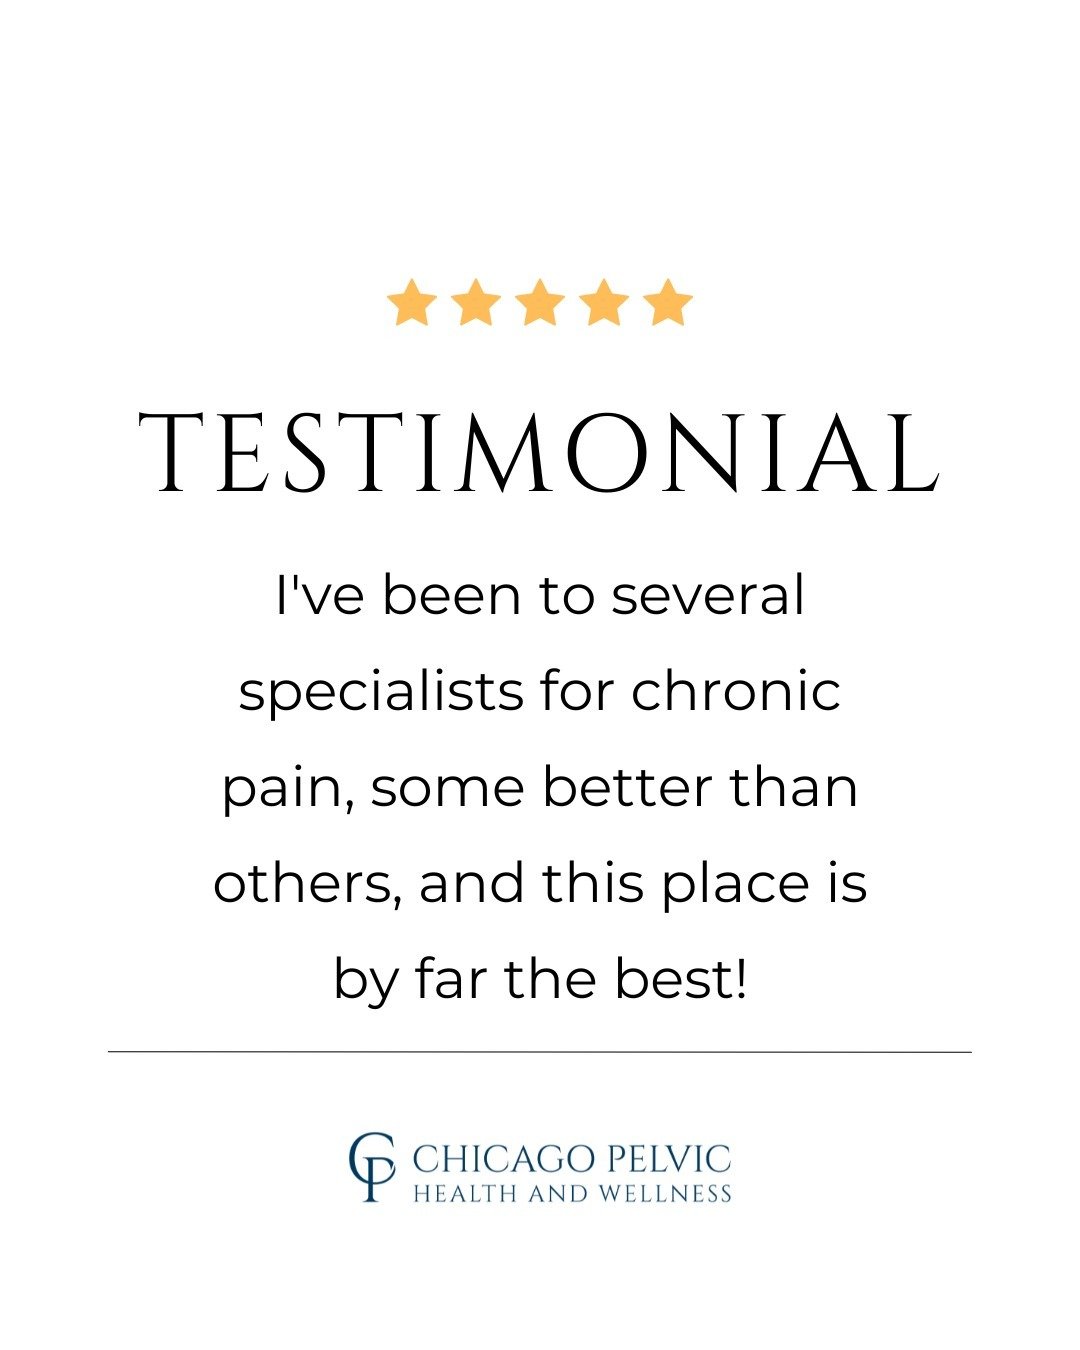 ✨Testimonial Tuesday✨

😫Chronic pelvic pain can feel so frustrating to navigate, especially when nothing is coming up on tests or images. 

🧩 Often times the pelvic floor is the missing piece to treating pelvic pain! 

🏃 We are so glad that patien